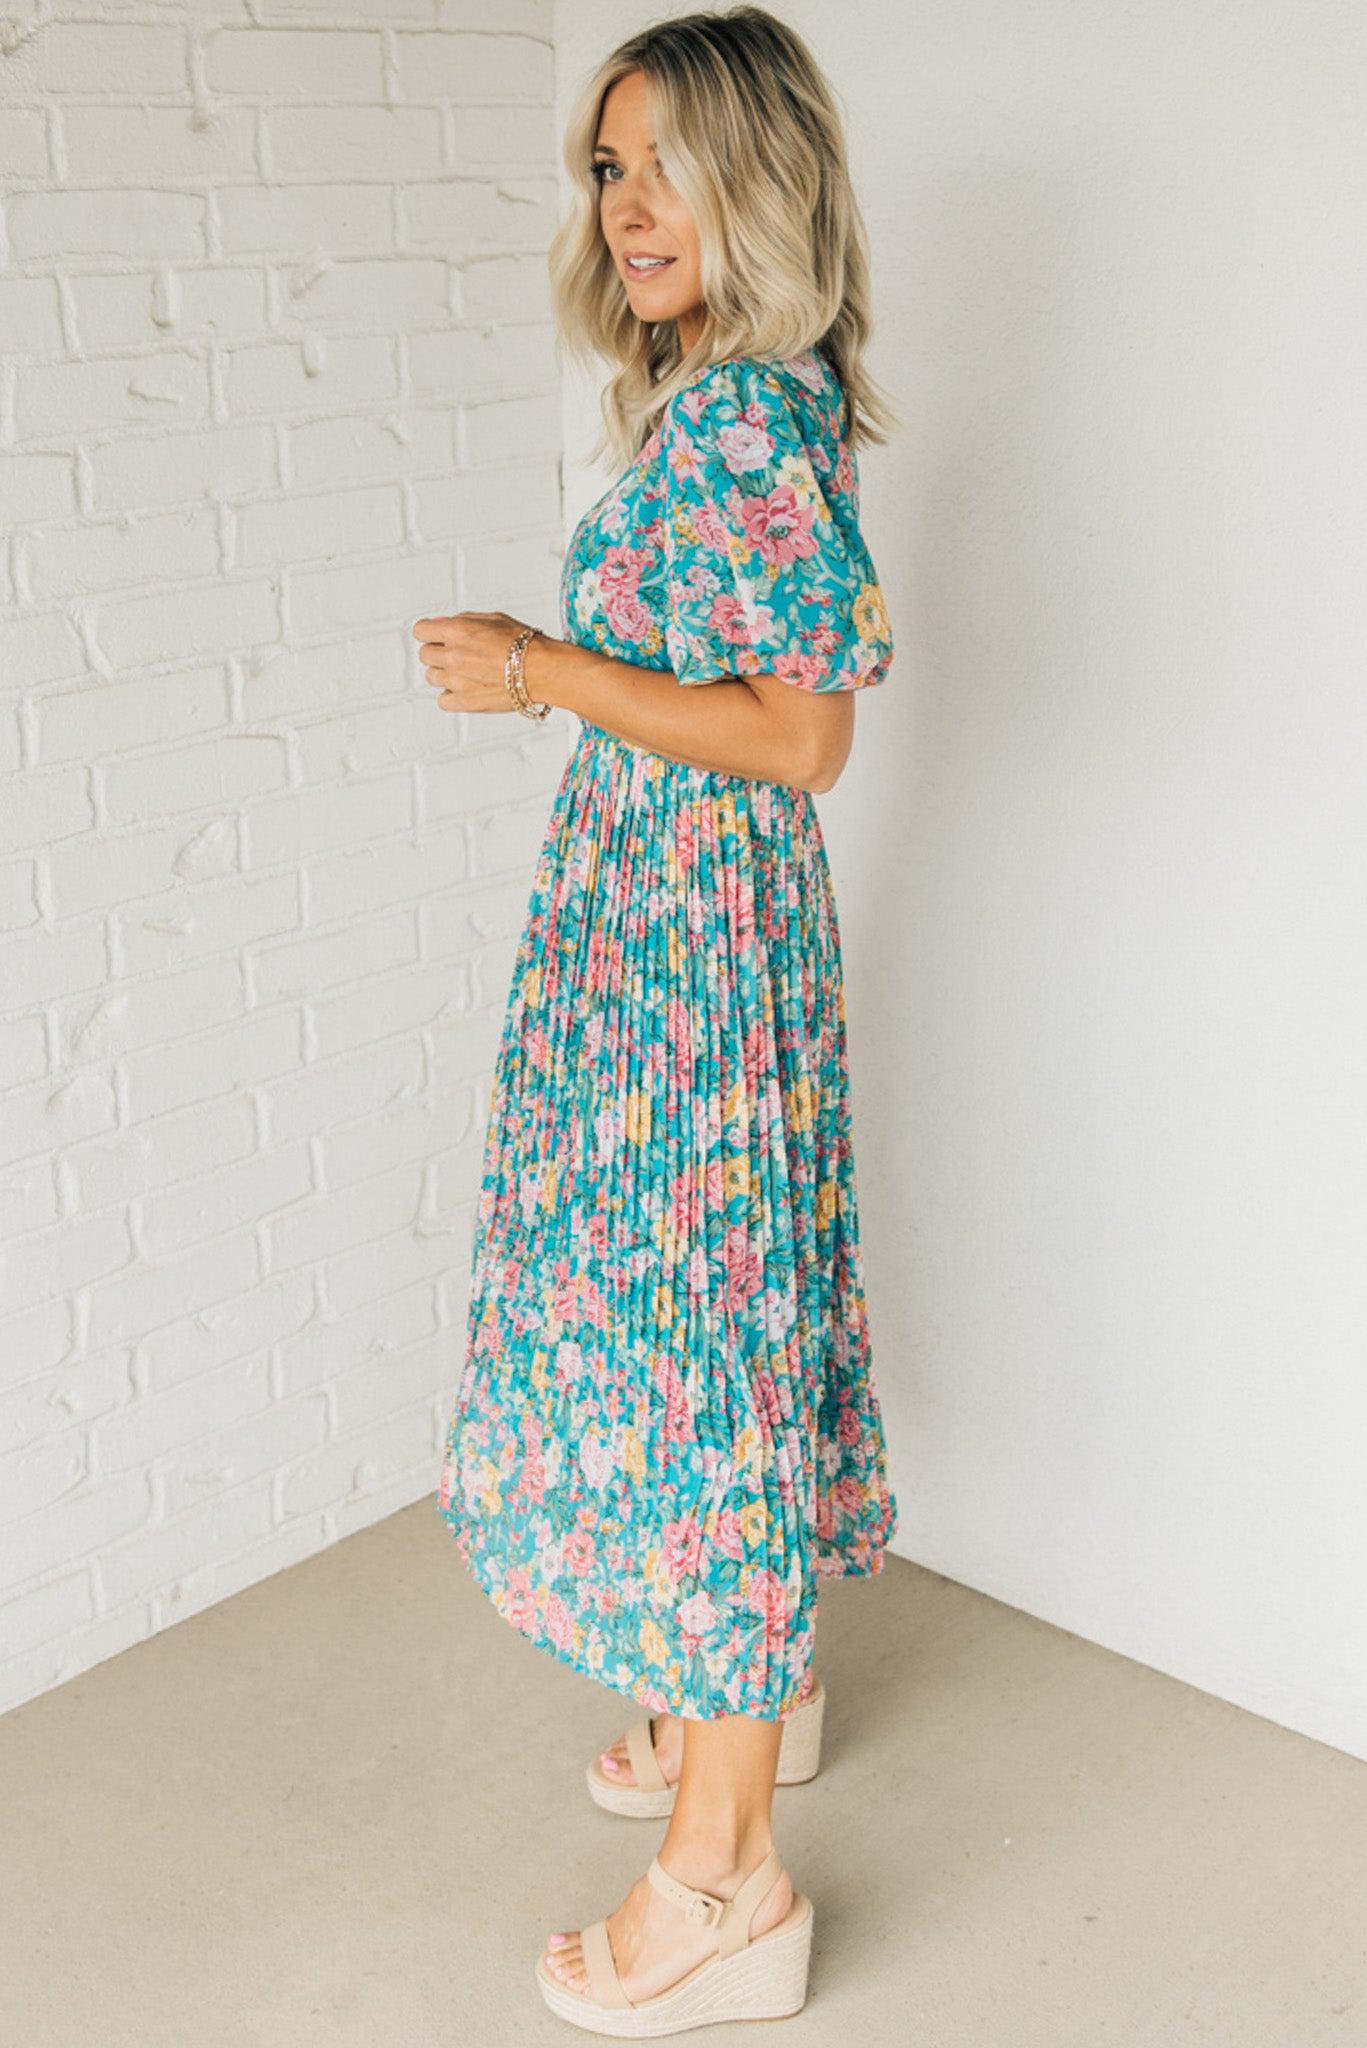 Women wearing a floral midi dress with short puff sleeves and a pleated skirt.